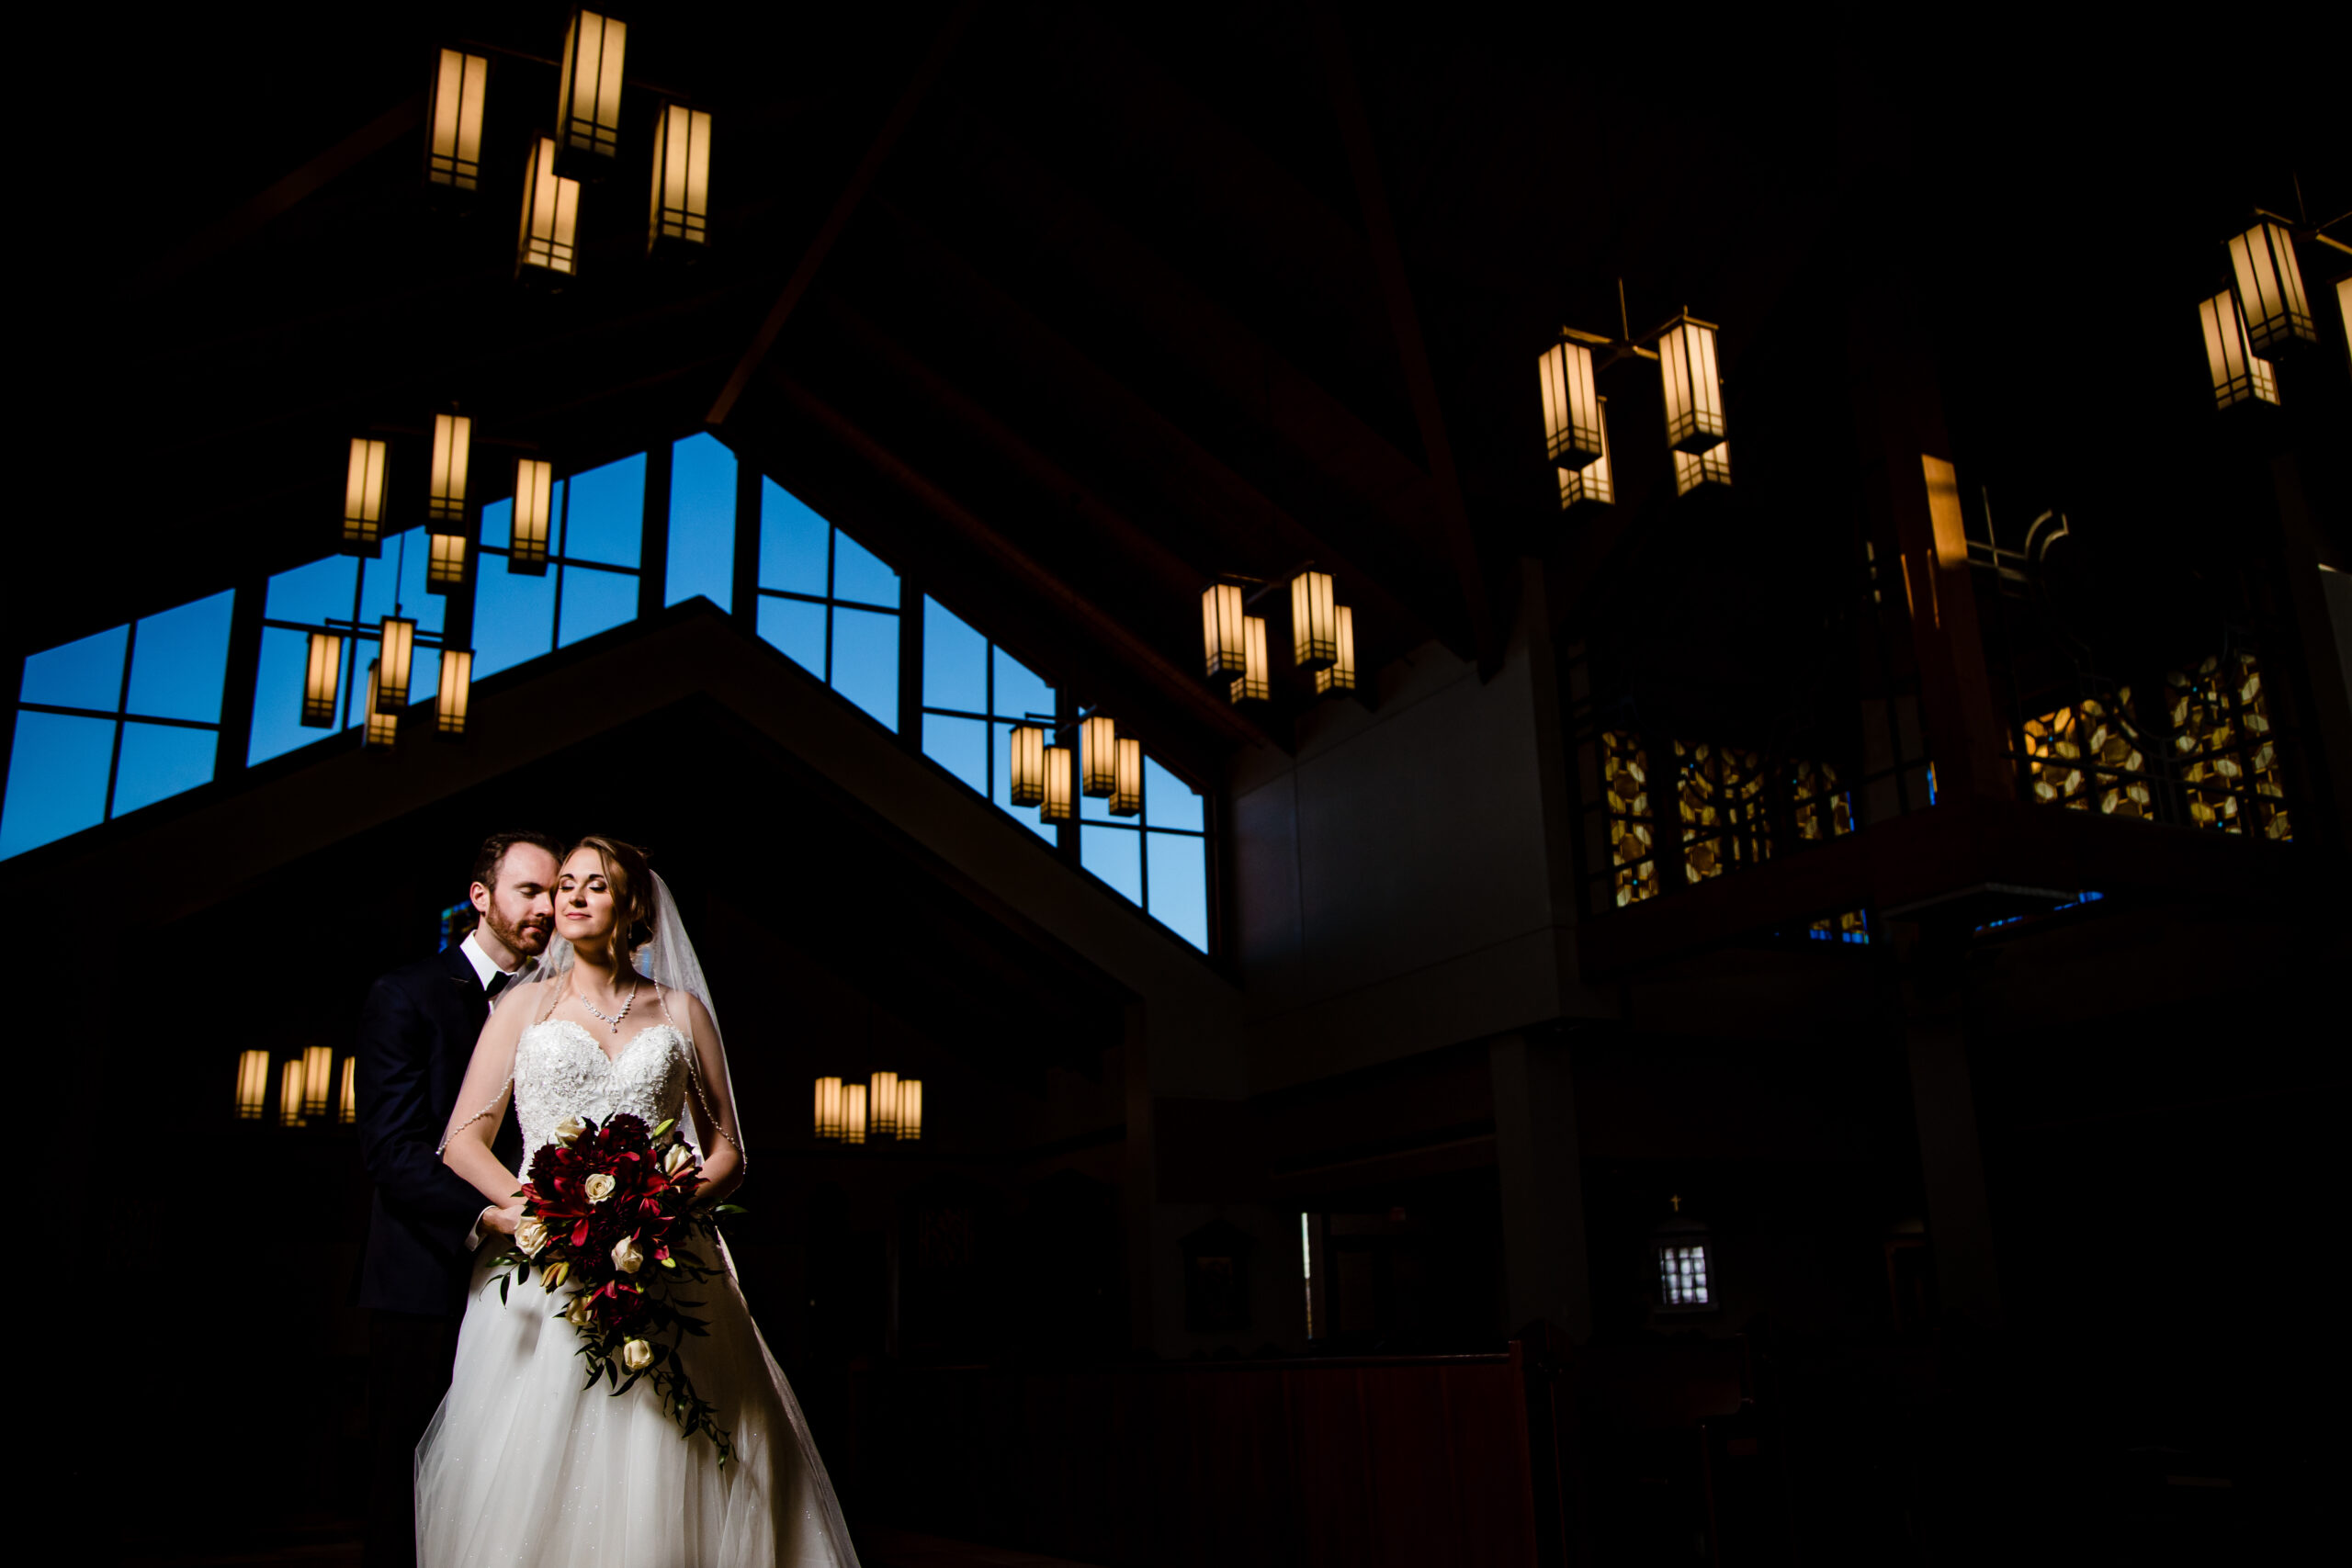 Creative portrait of the bride and groom inside the Our Lady of Guadalupe Church in Doylestown. The couple is beautifully framed in the church's elegant interior, captured by North Jersey wedding photographer Jarot Bocanegra